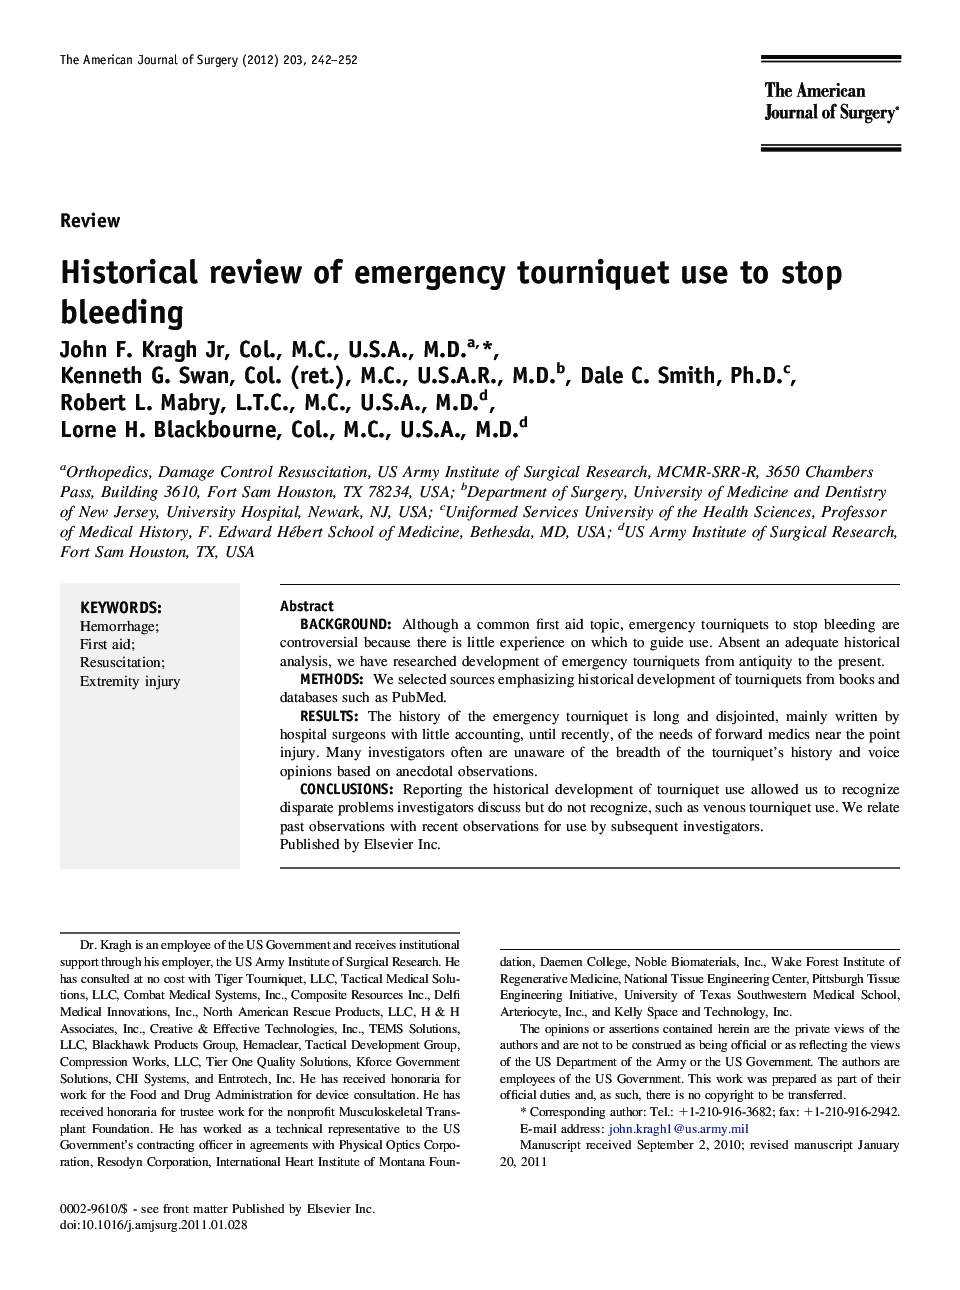 Historical review of emergency tourniquet use to stop bleeding 